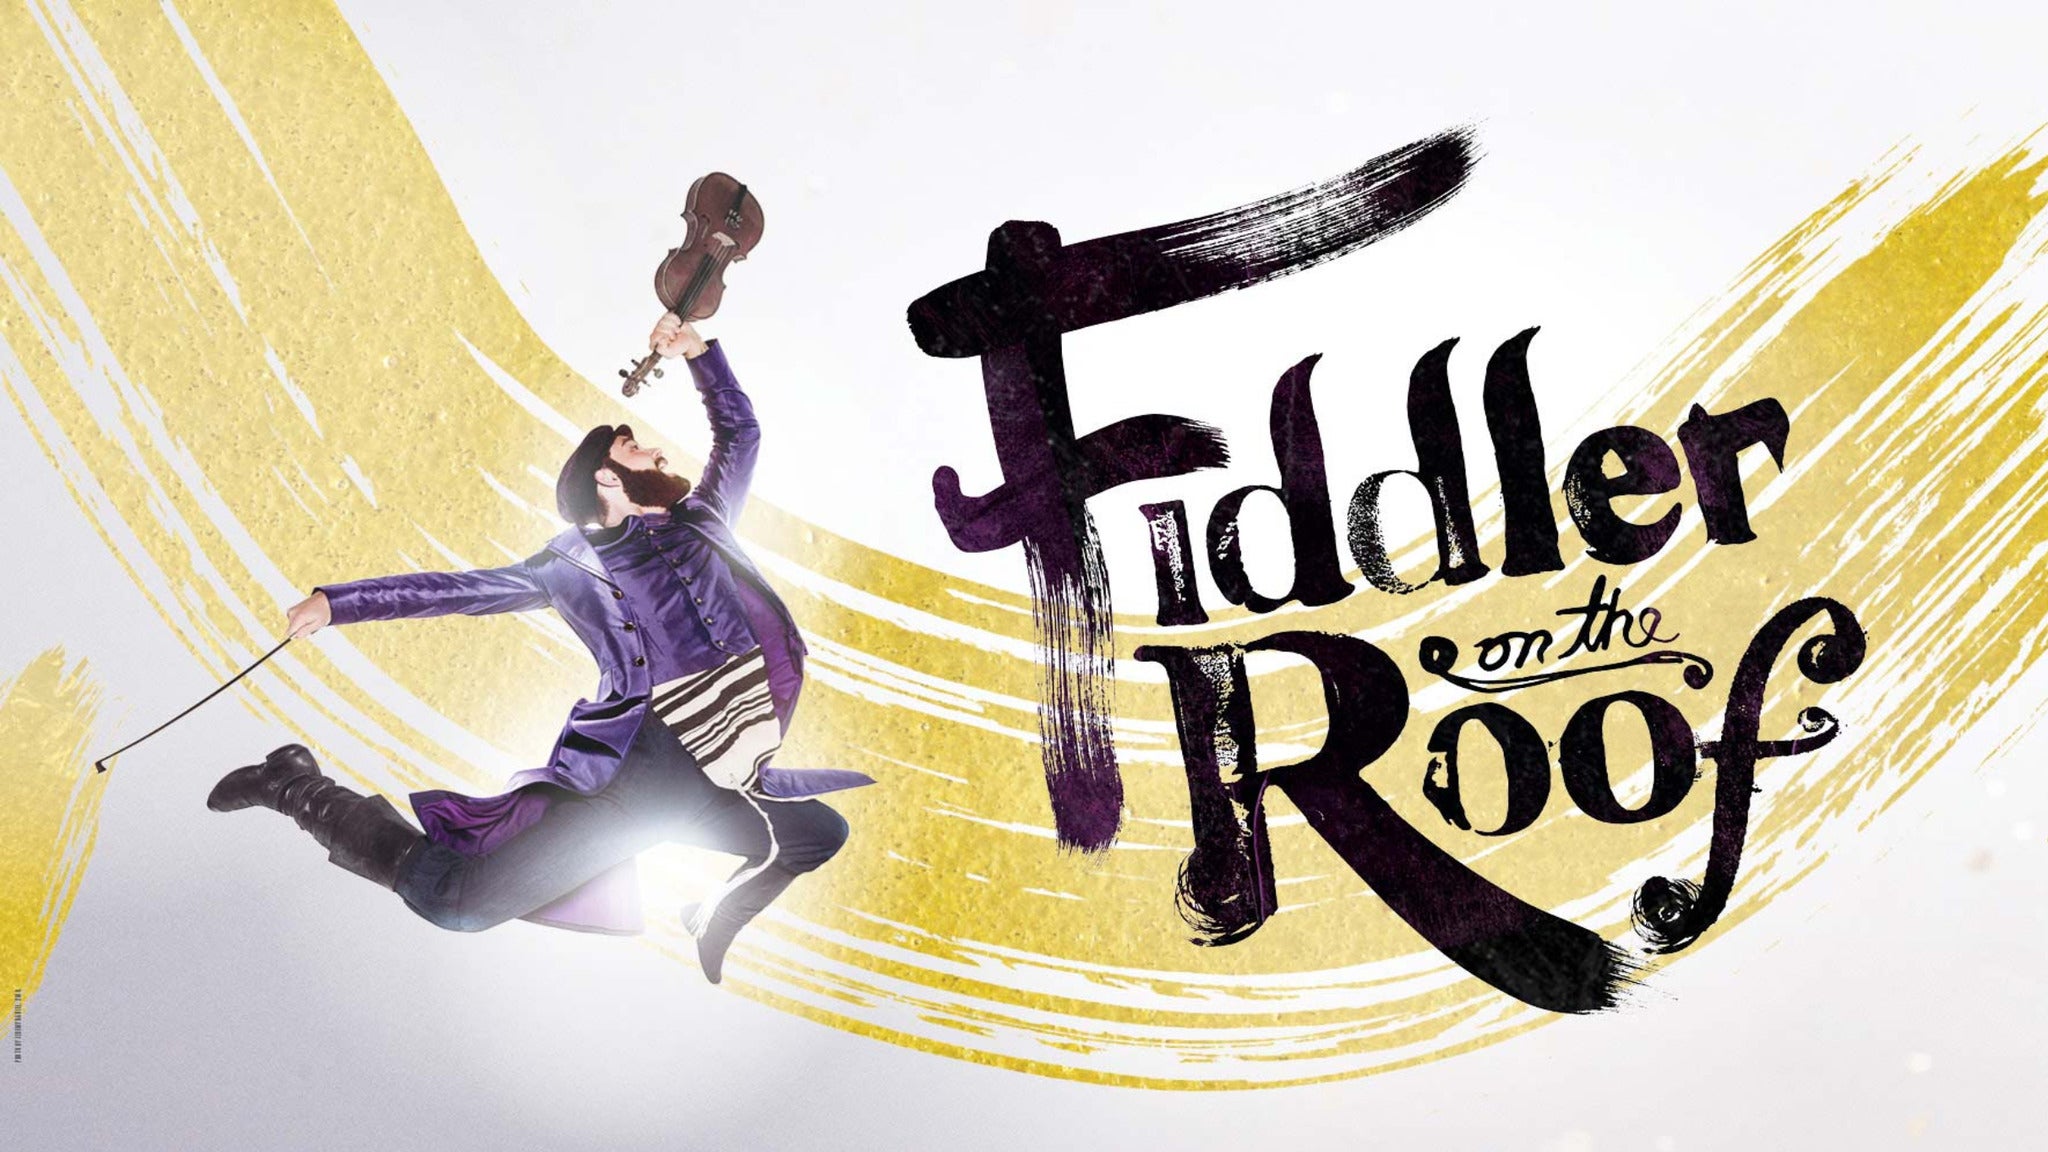 Fiddler On The Roof at Pikes Peak Center - Colorado Springs, CO 80903